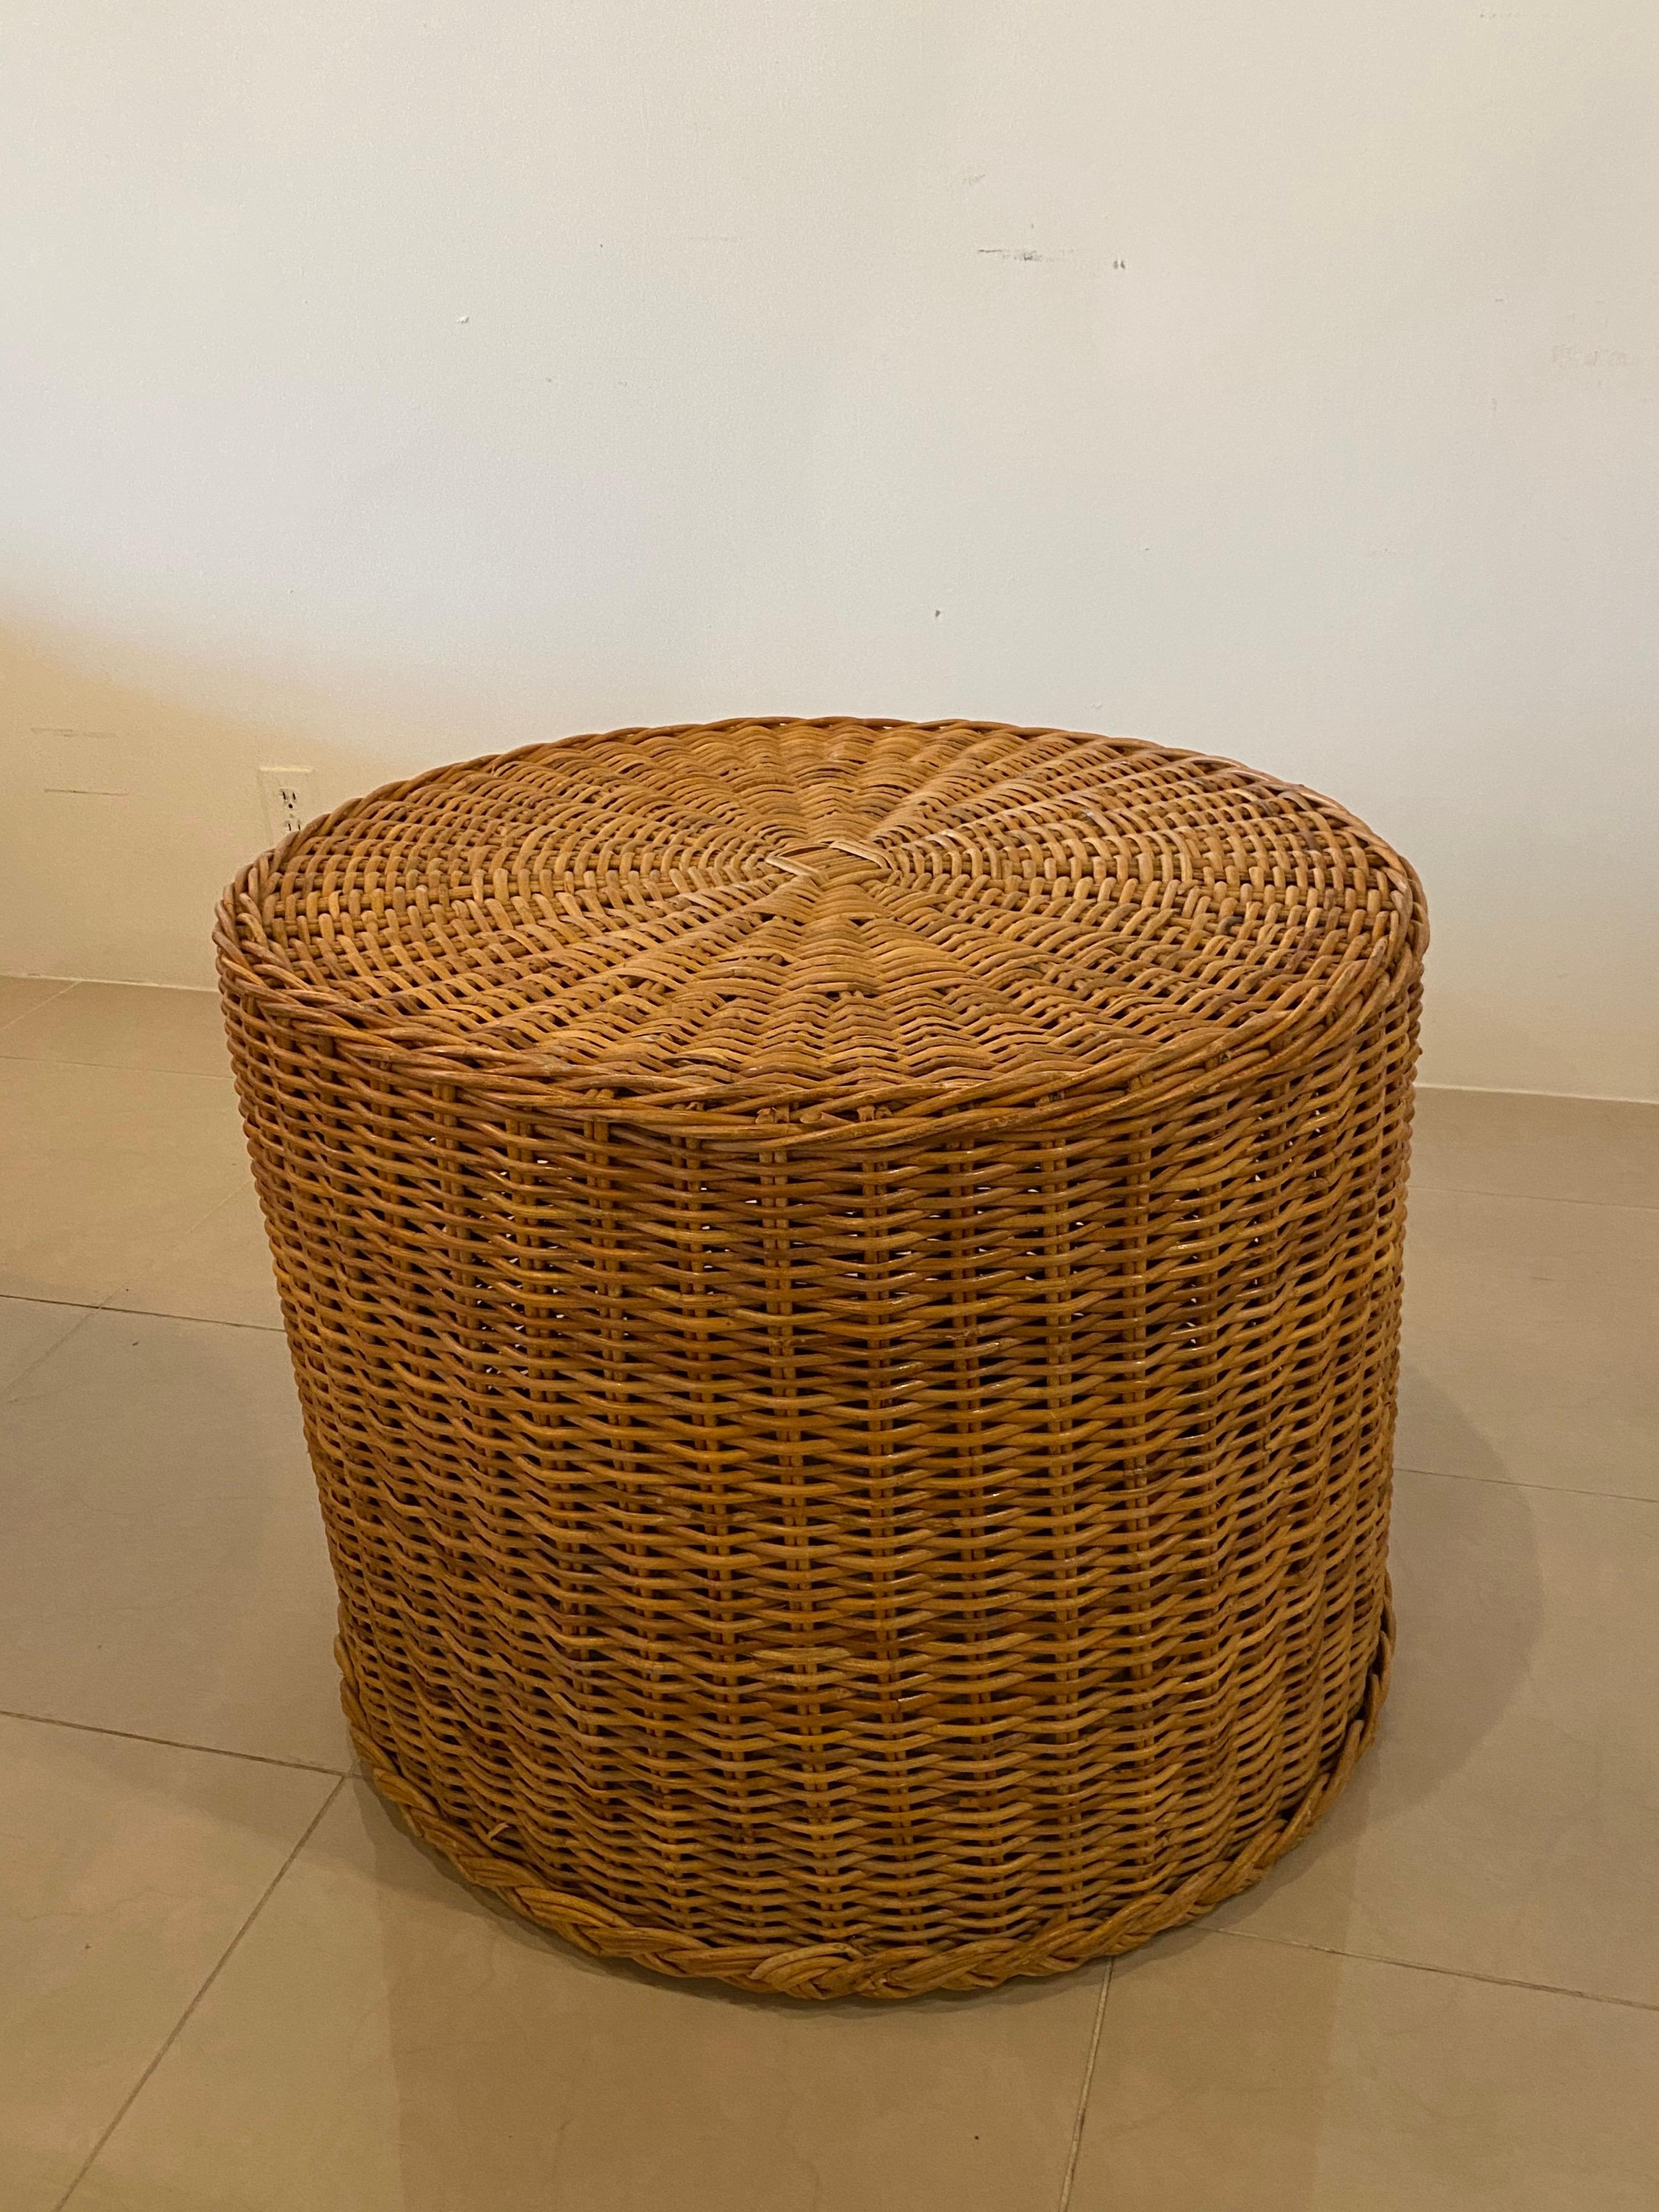 Late 20th Century Vintage Wicker Works Round Braided Wicker Side End Table